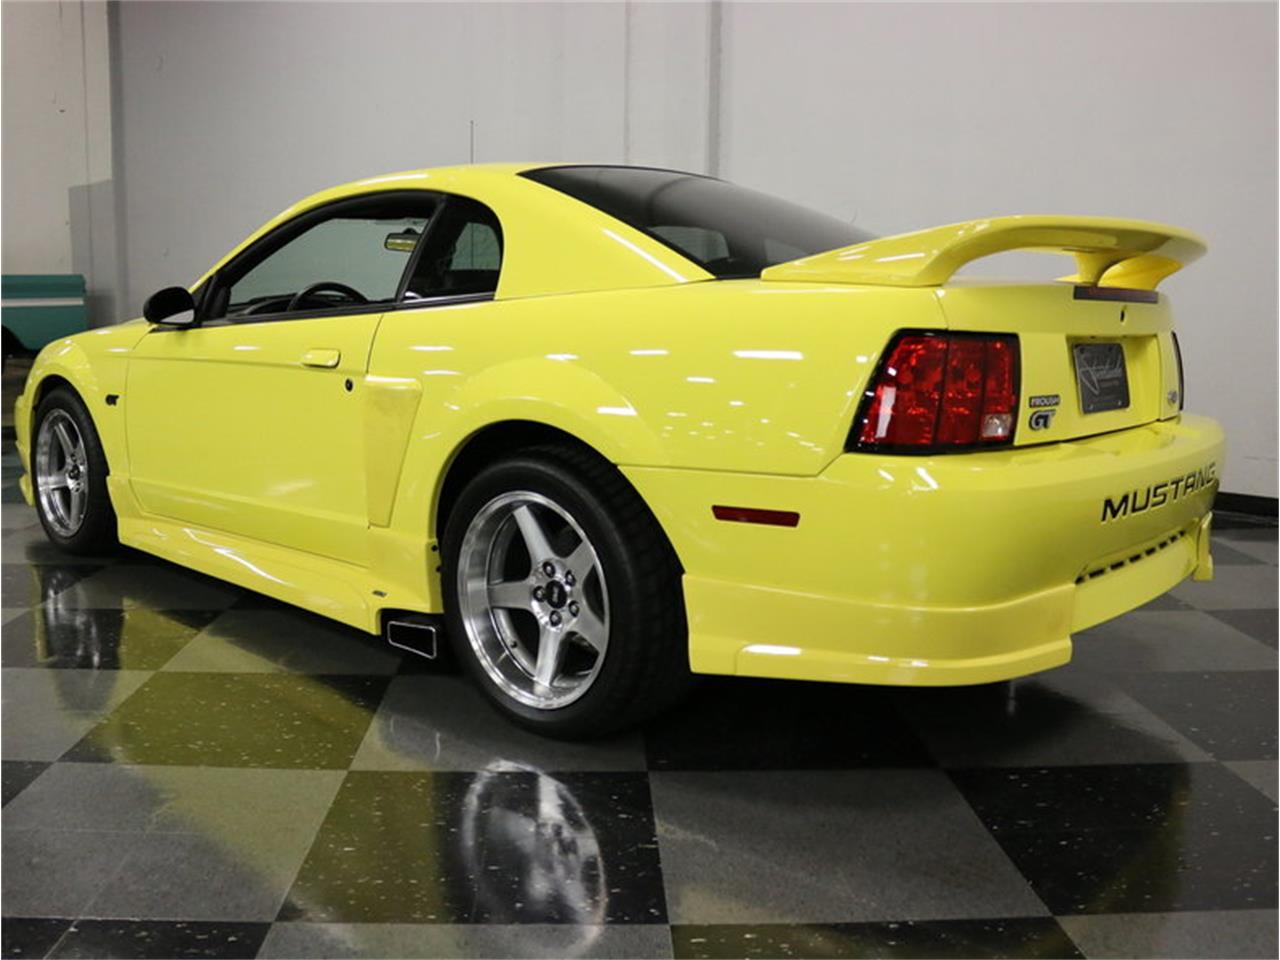 2000 Ford Mustang Roush Stage 2 for Sale | ClassicCars.com | CC-1048707